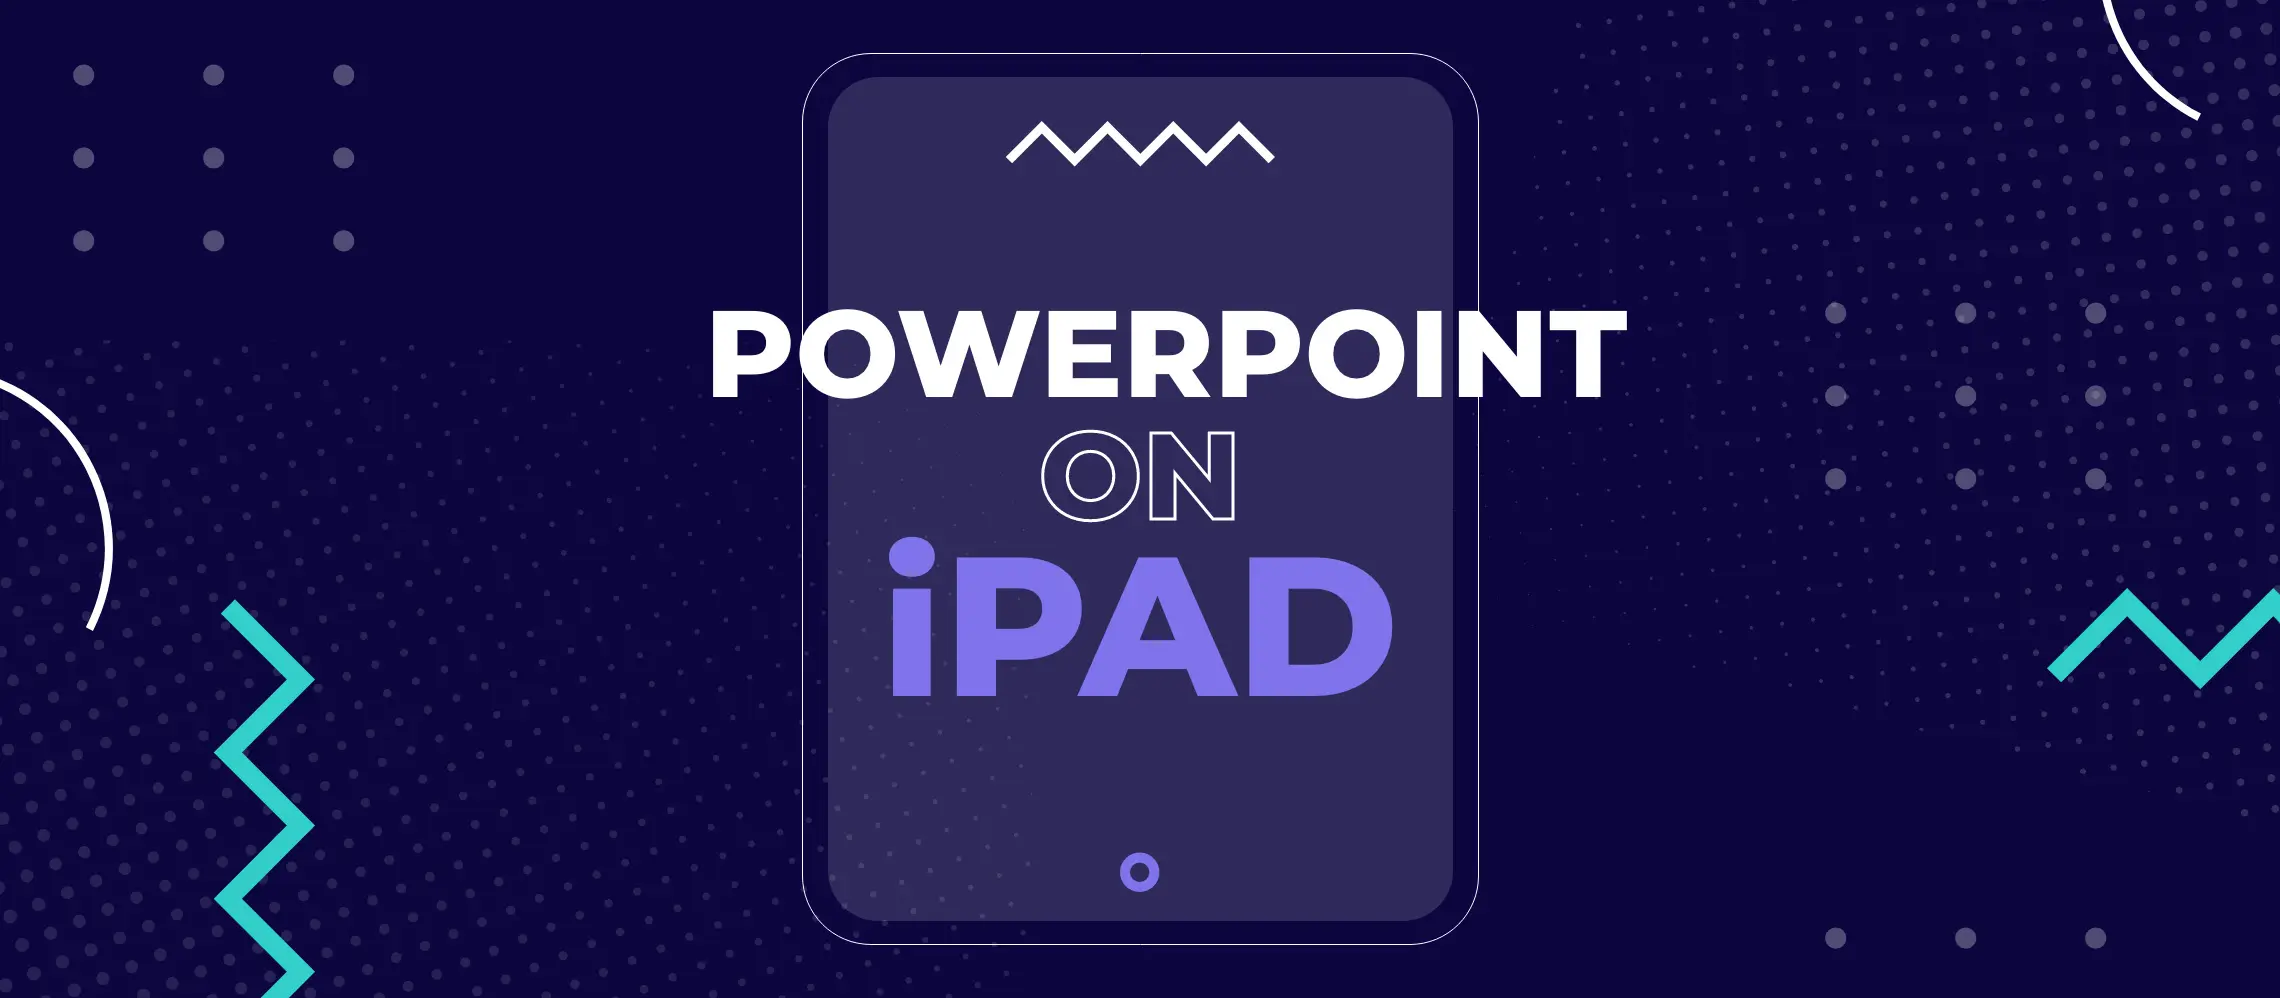 PowerPoint on iPad: create presentations anytime, anywhere.